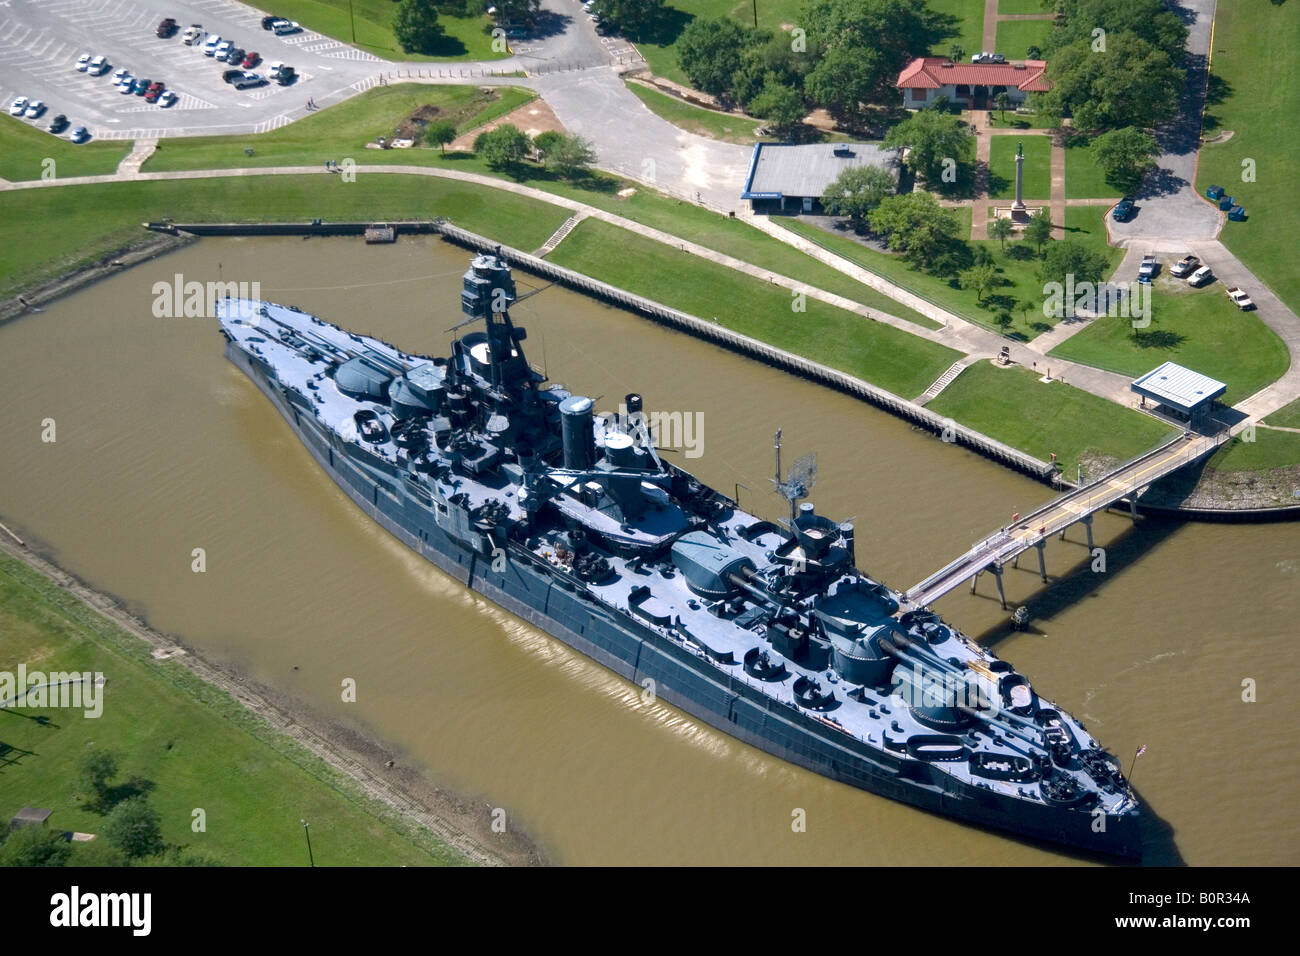 Aerial view of the Museum Battleship USS Texas at the San Jacinto Battleground State Historic Site in Houston Texas Stock Photo